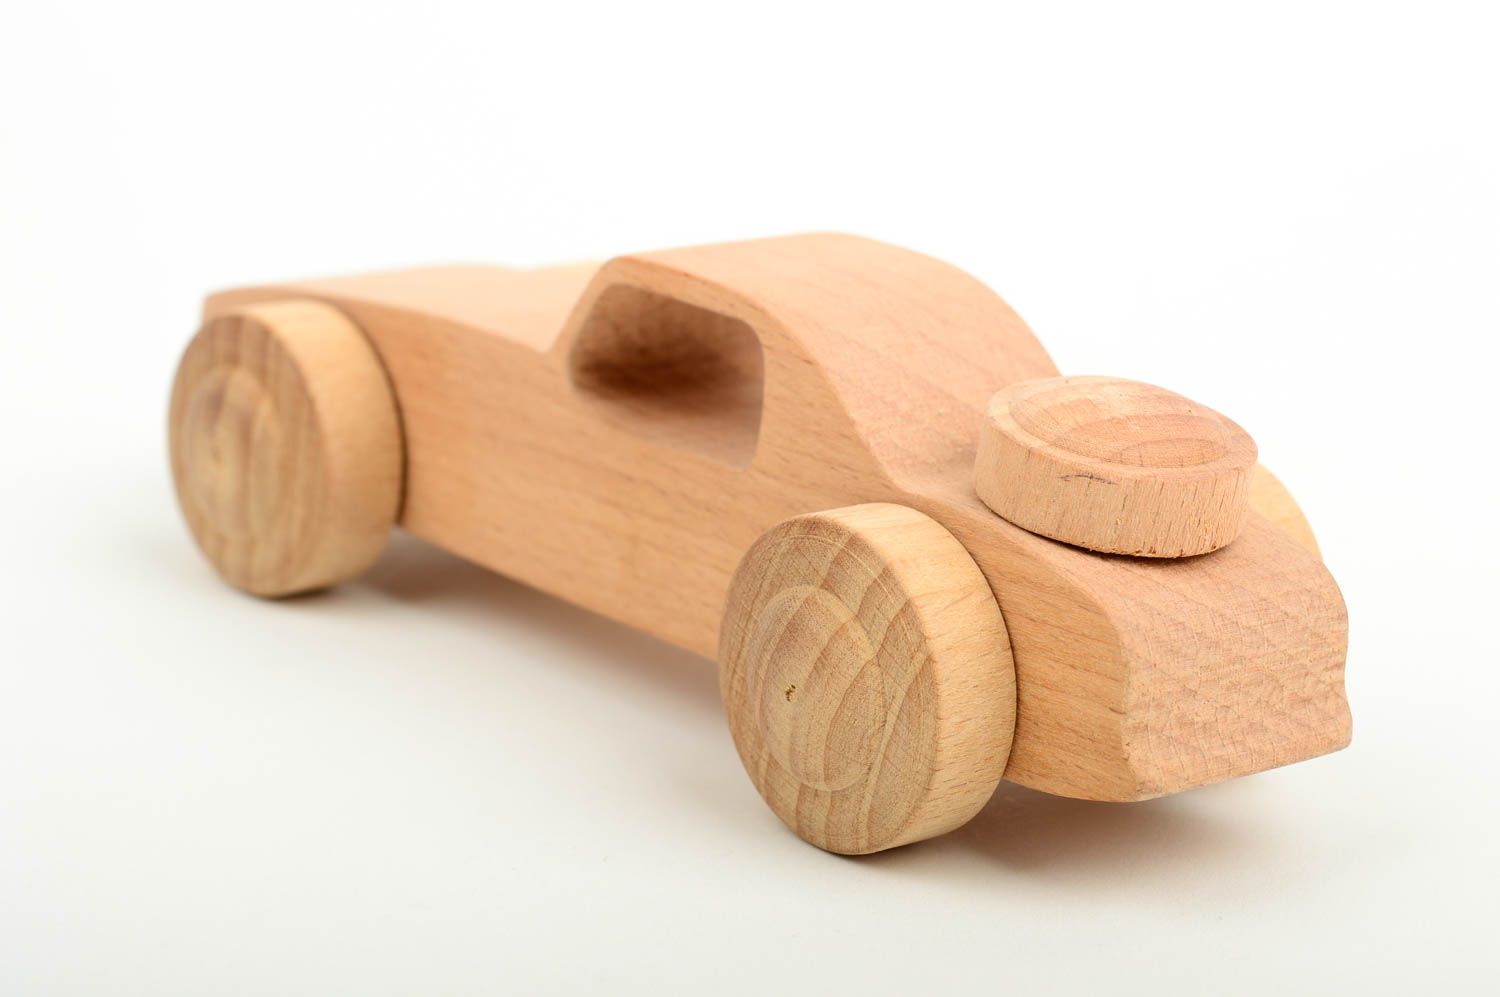 Handmade wood toy childrens wheeled toys toy car wooden gifts presents for kids photo 4